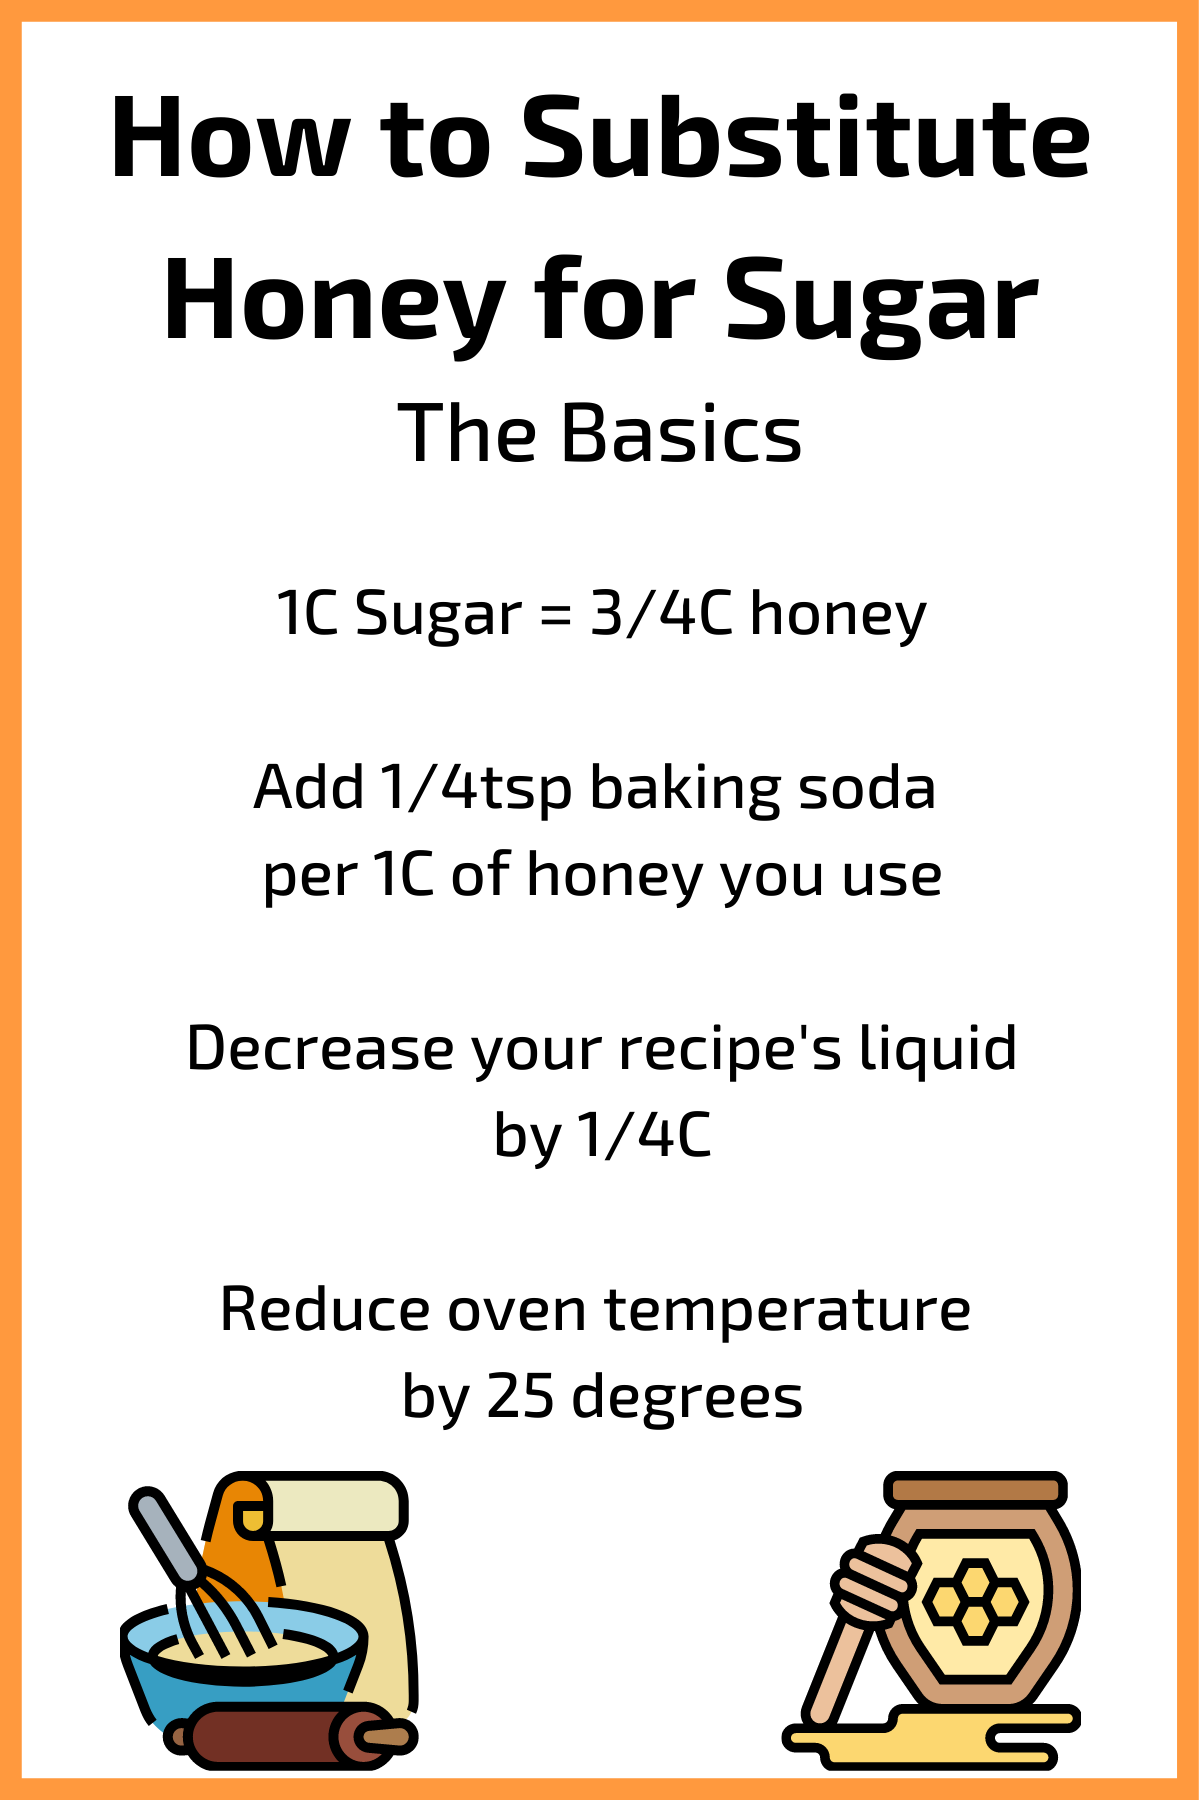 the basics - how to substitute honey for sugar in your favorite baking recipes